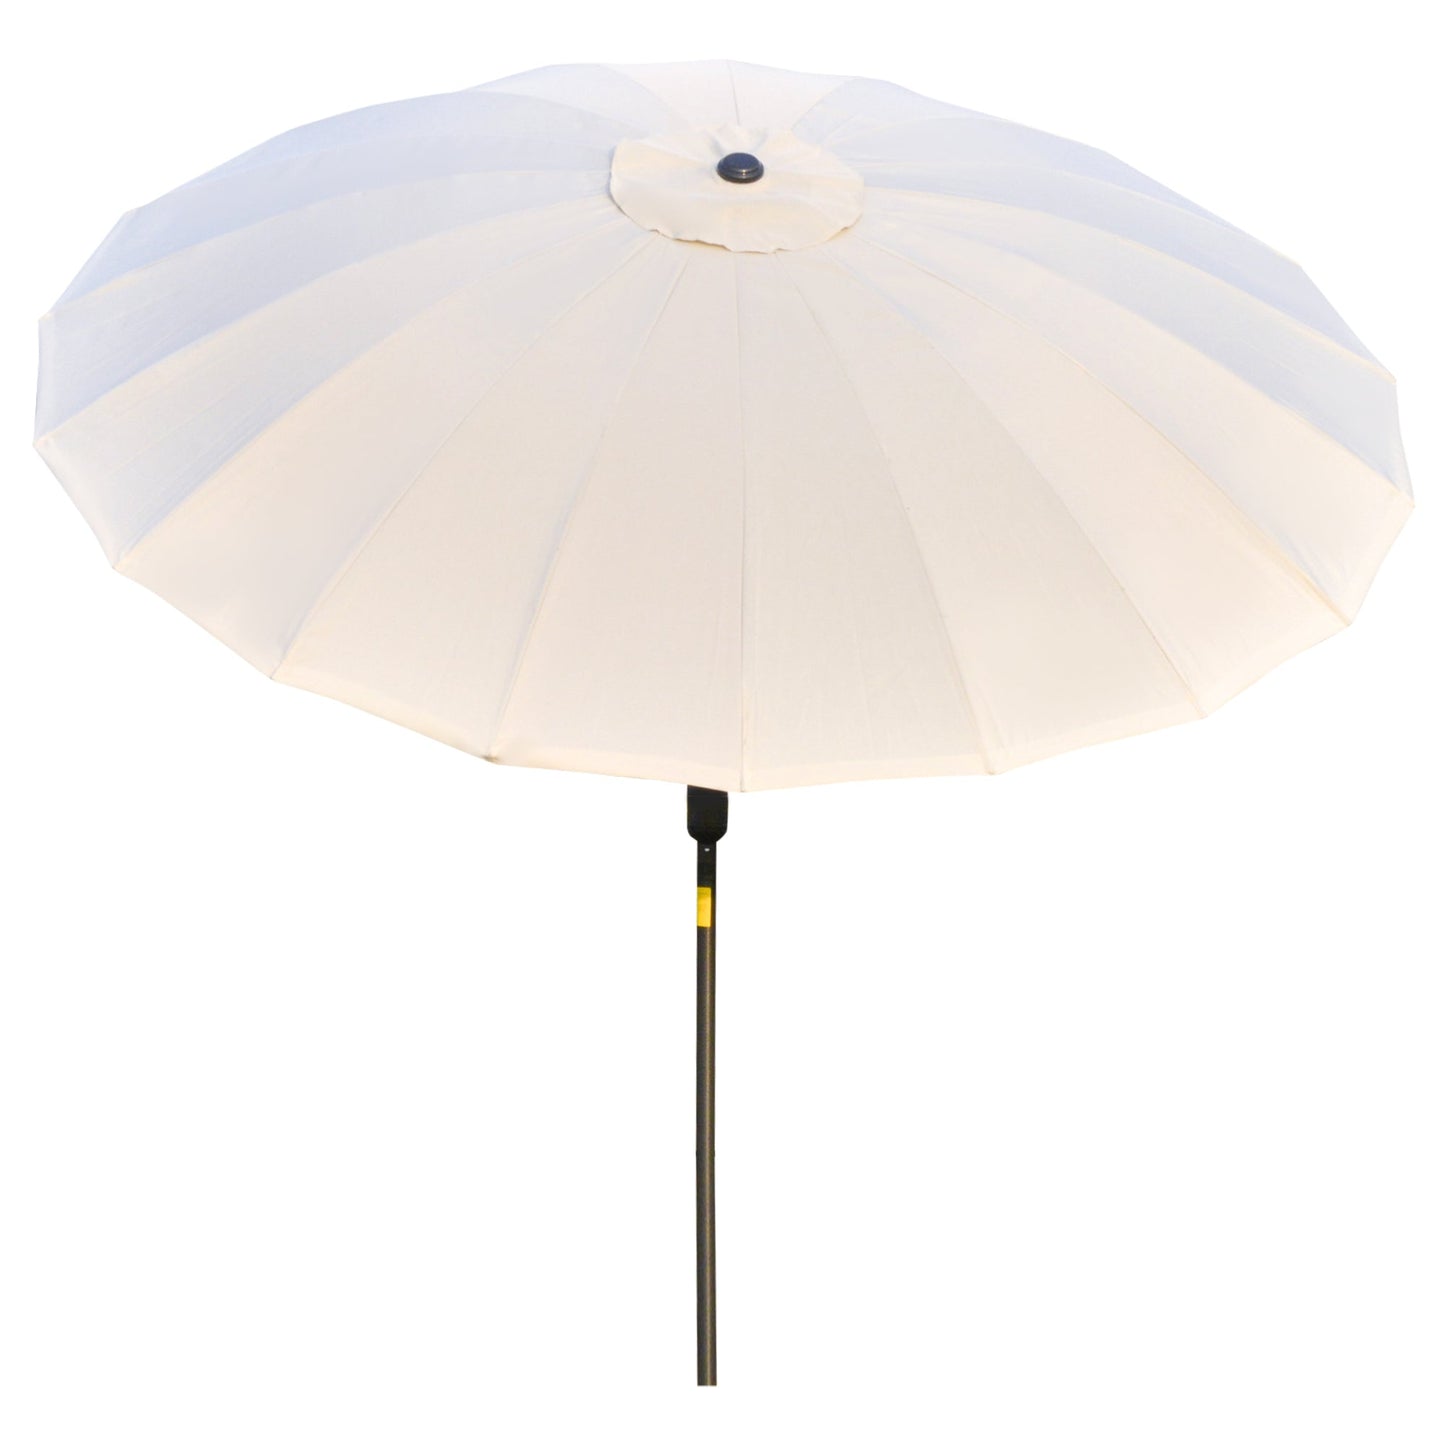 Ф255cm Patio Parasol Umbrella Outdoor Market Table Parasol with Push Button Tilt Crank and 18 Sturdy Ribs for Garden Lawn Backyard Pool Crema White Adjustable Angle Detachable Structure